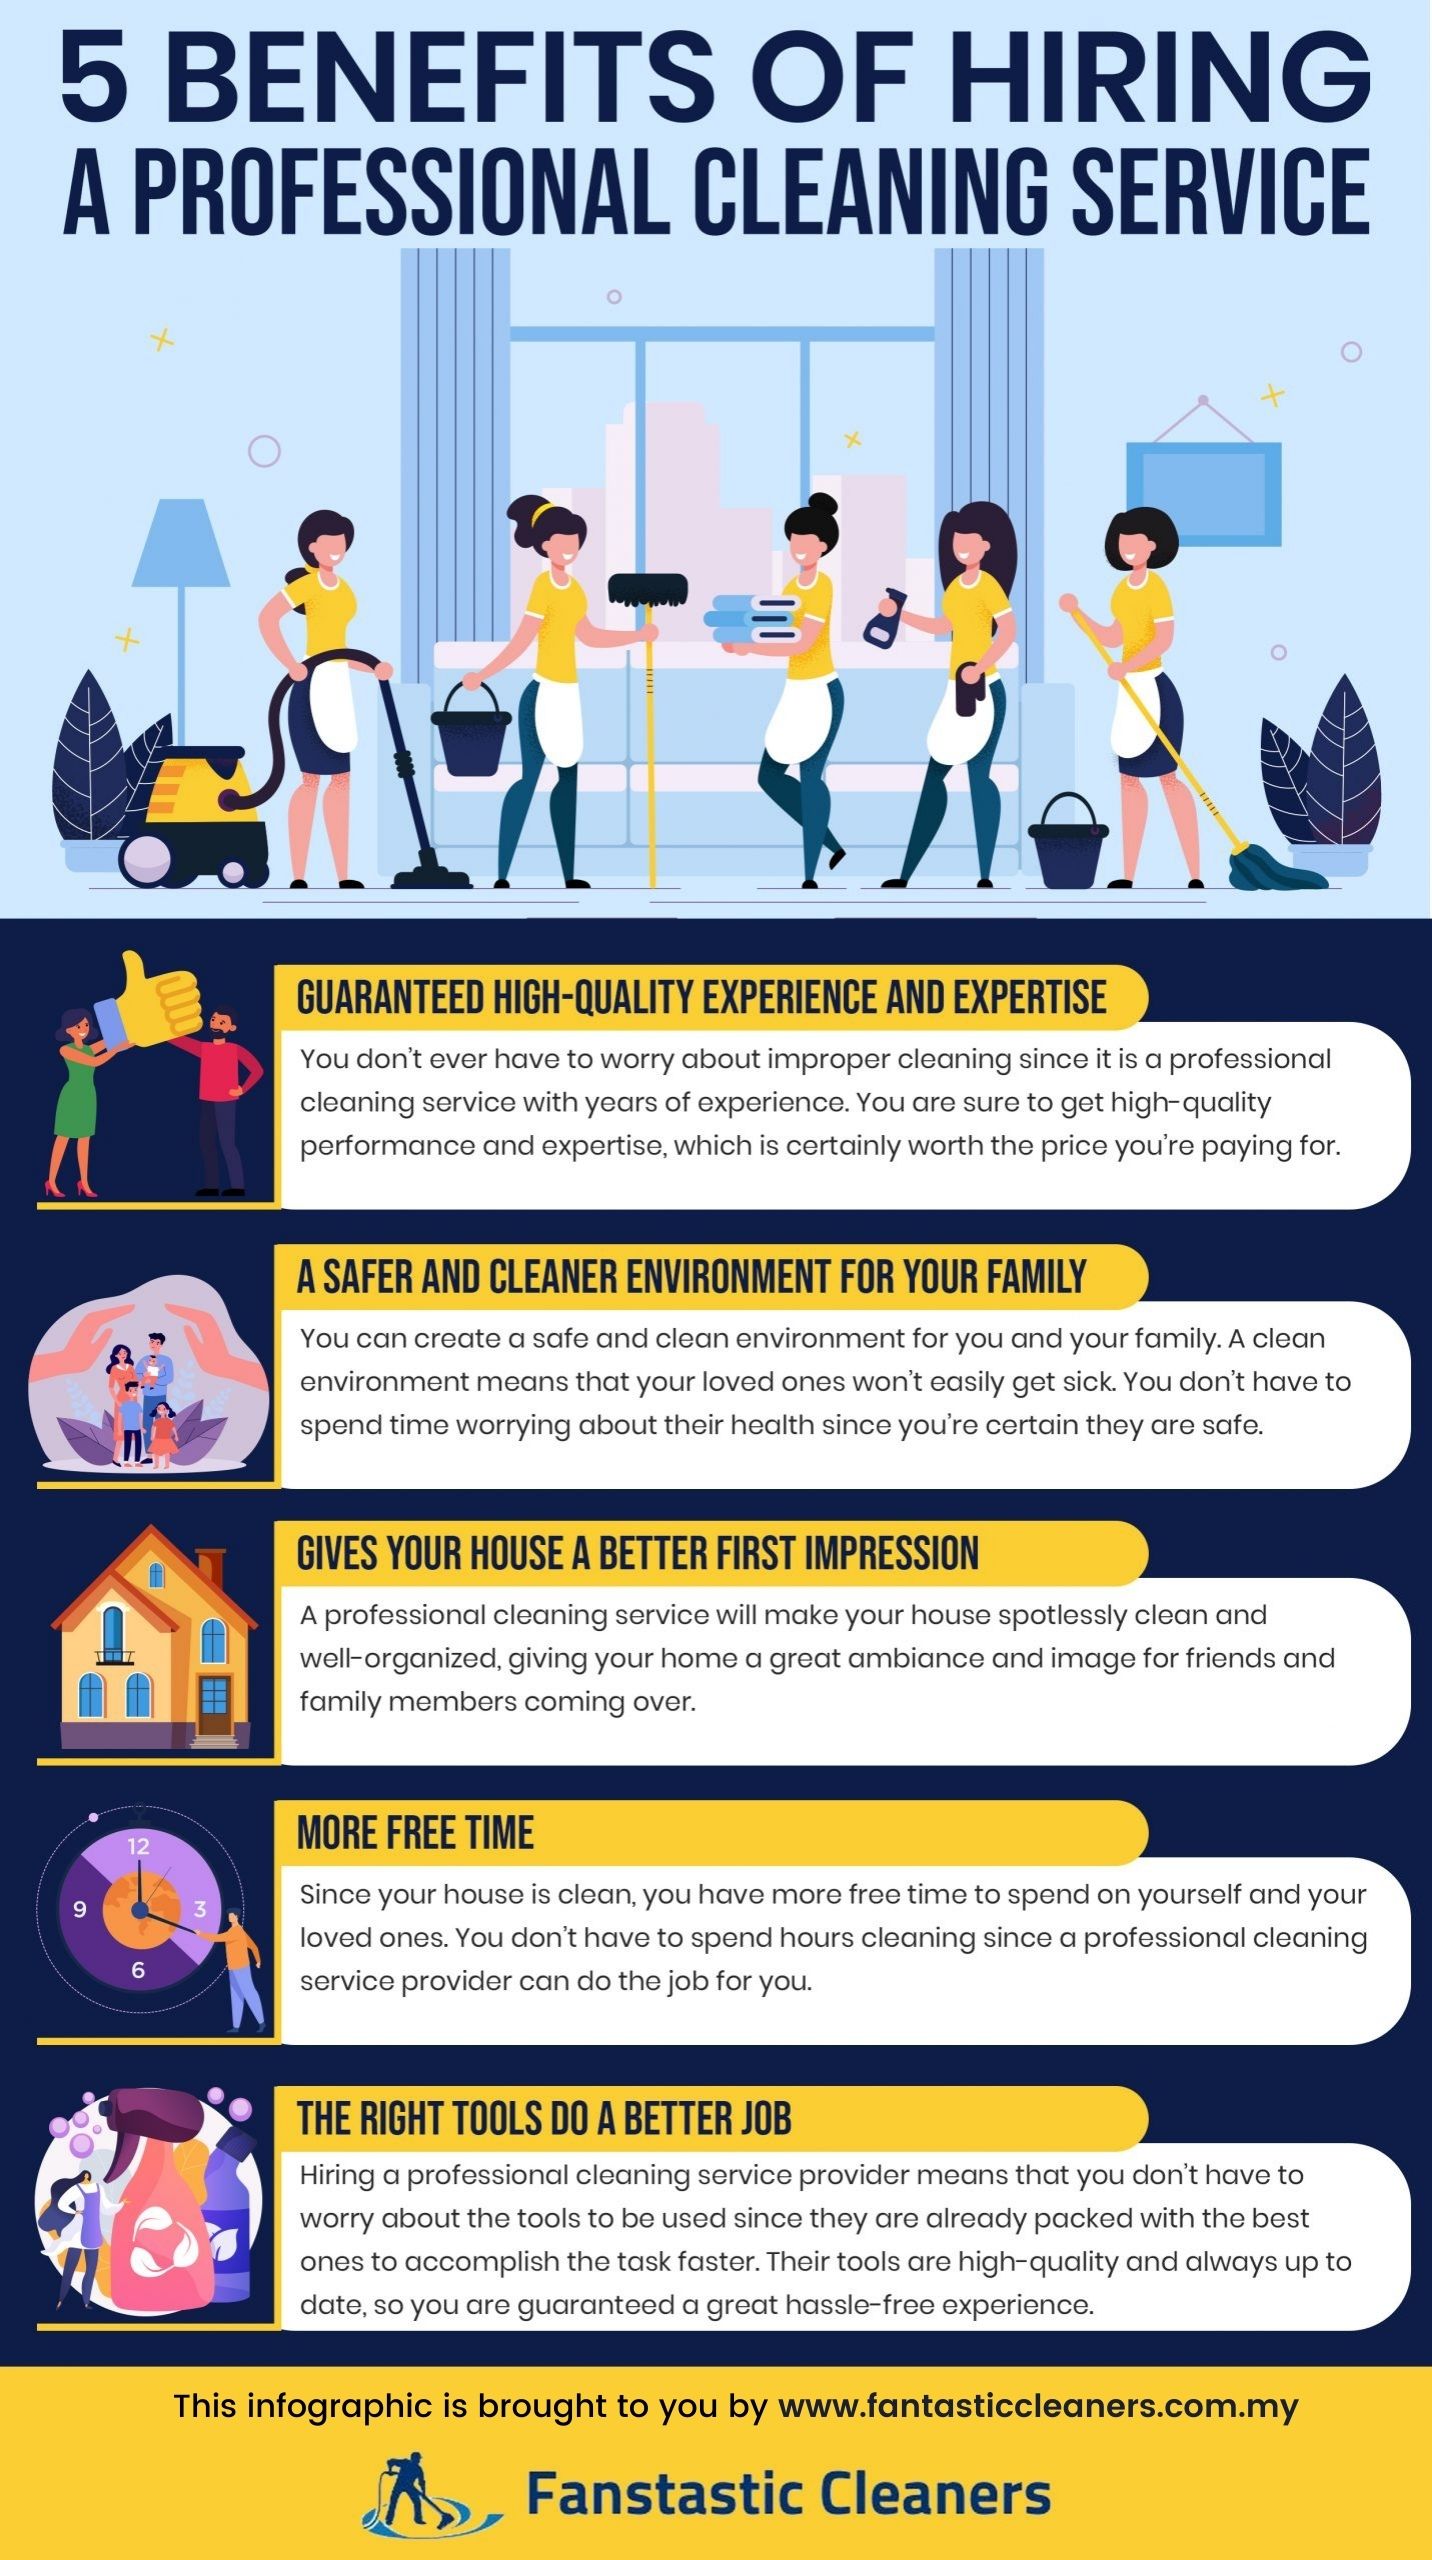 https://www.fantasticcleaners.com.my/wp-content/uploads/2021/02/Benefits-Of-Hiring-a-Professional-Cleaning-Service-Infographic.jpg